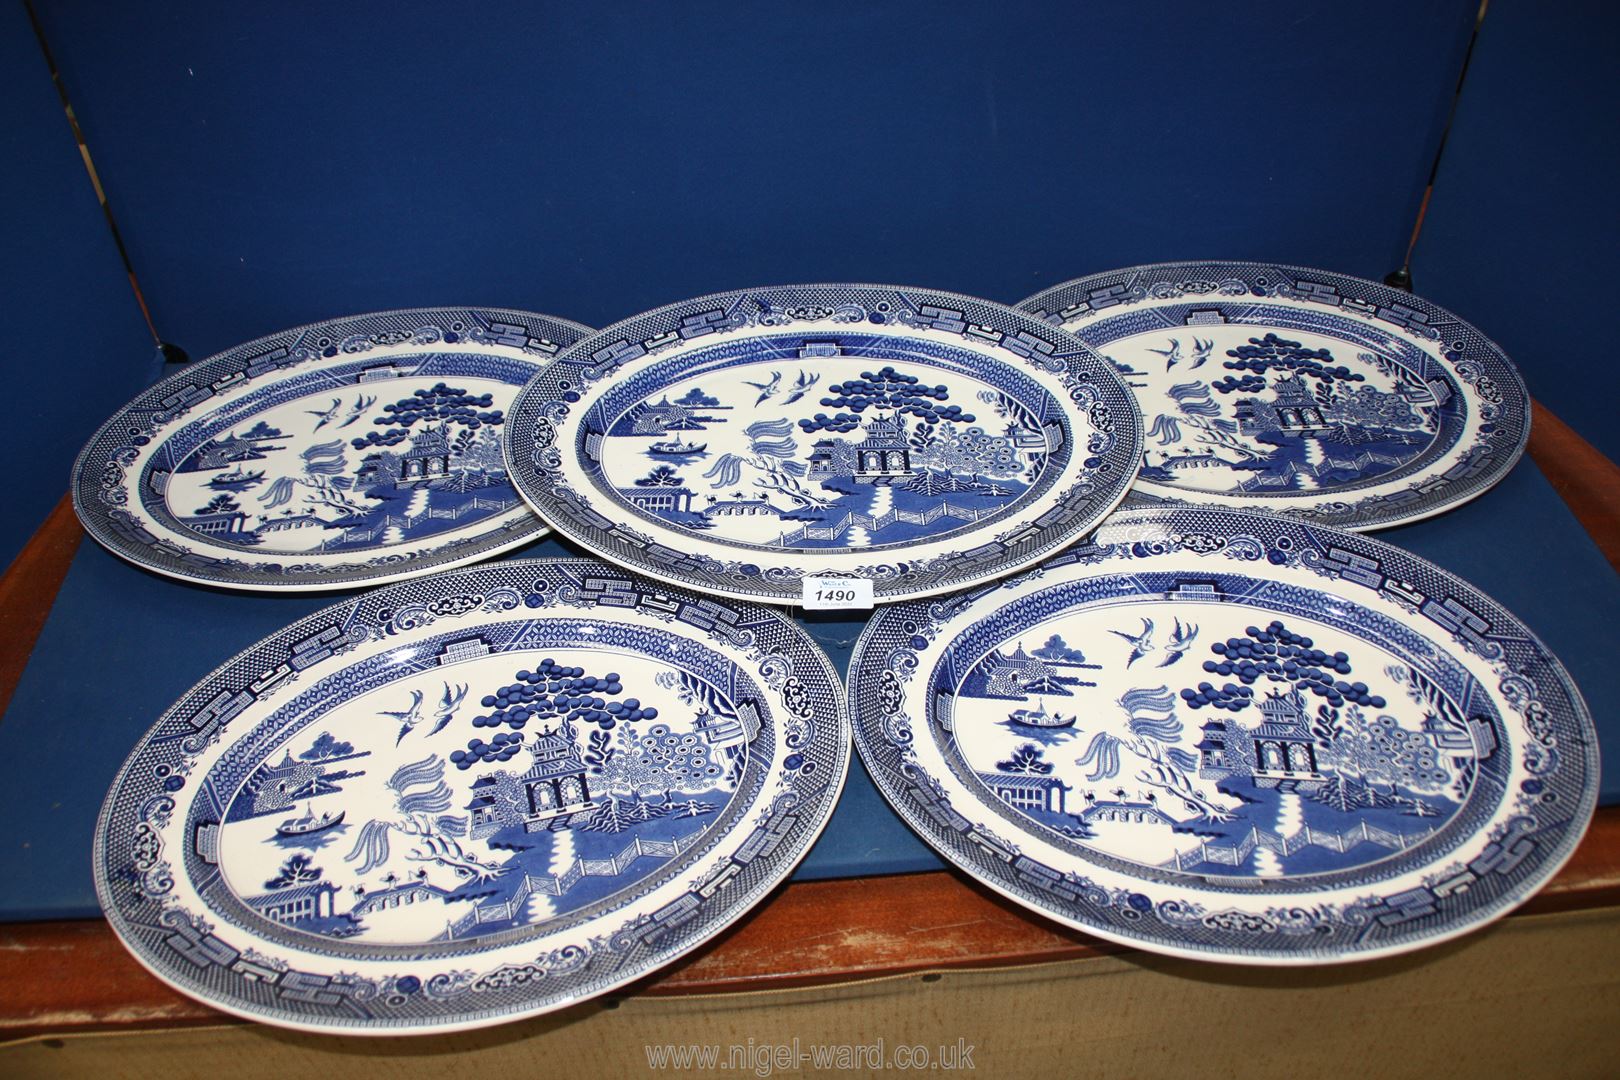 Five Johnson Bros. Willow pattern meat plates.